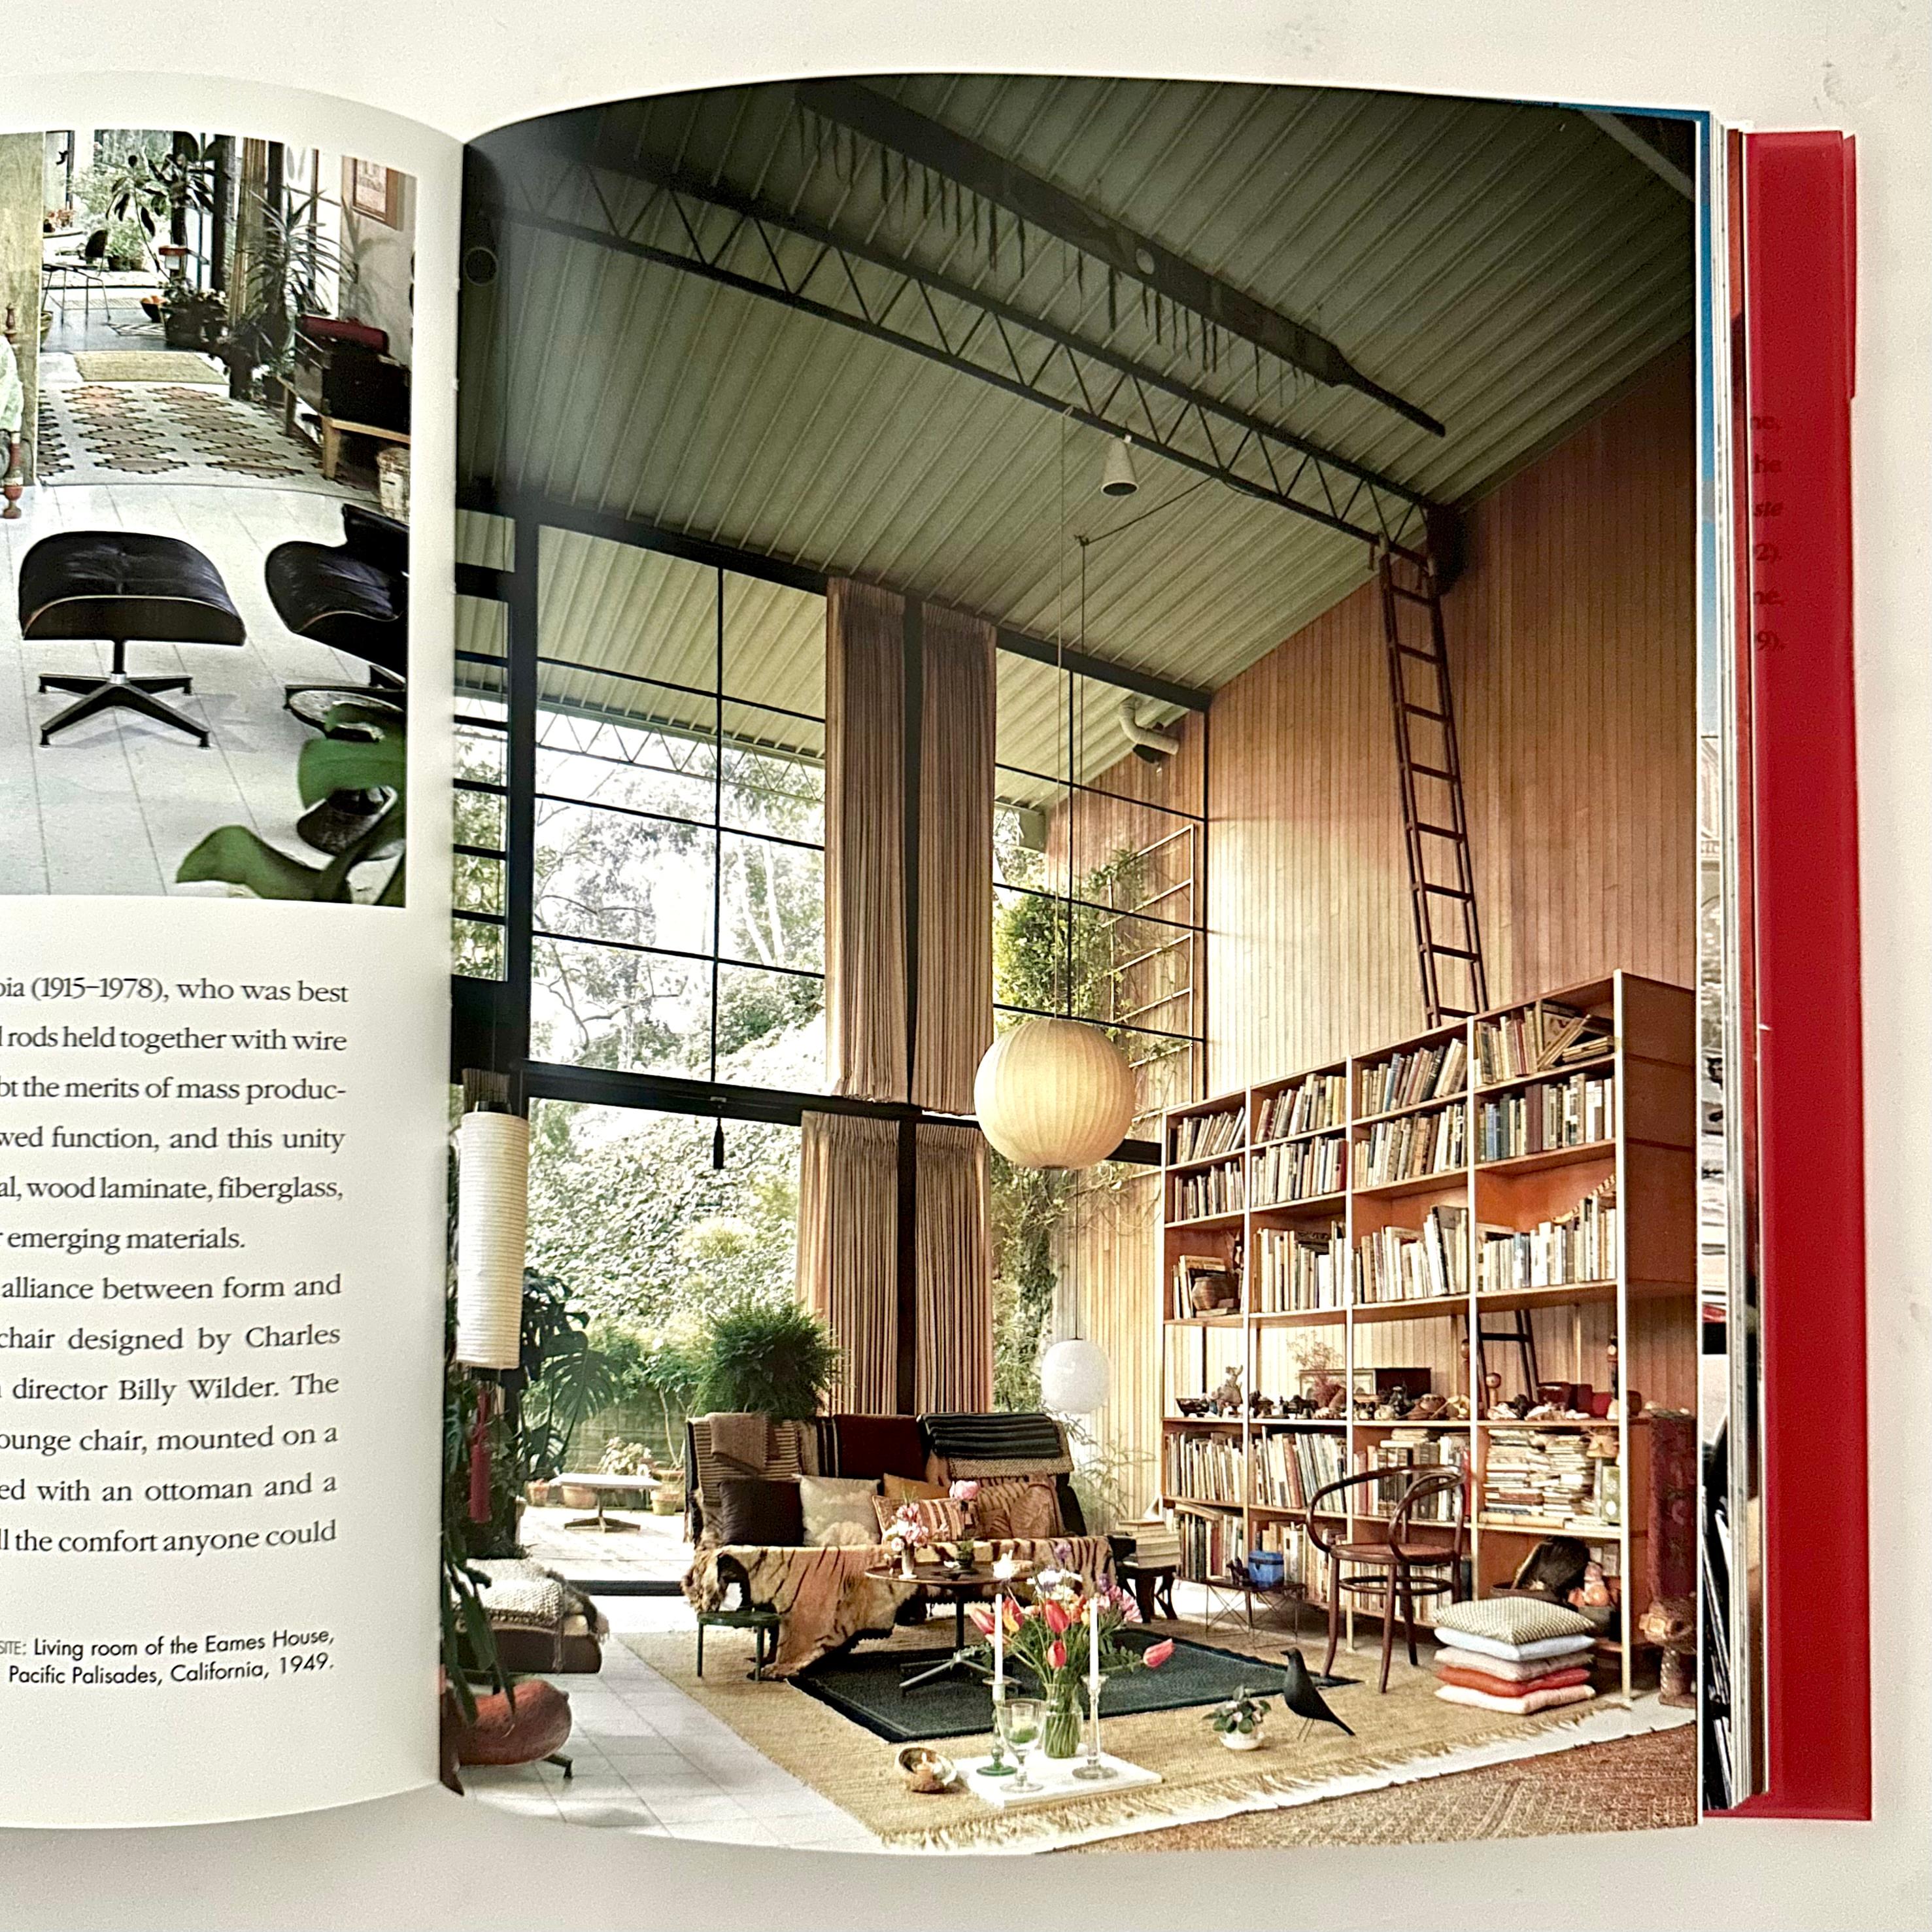 Contemporary Compendium of Interiors Styles - François Baudot - 1st Edition, New York, 2005 For Sale